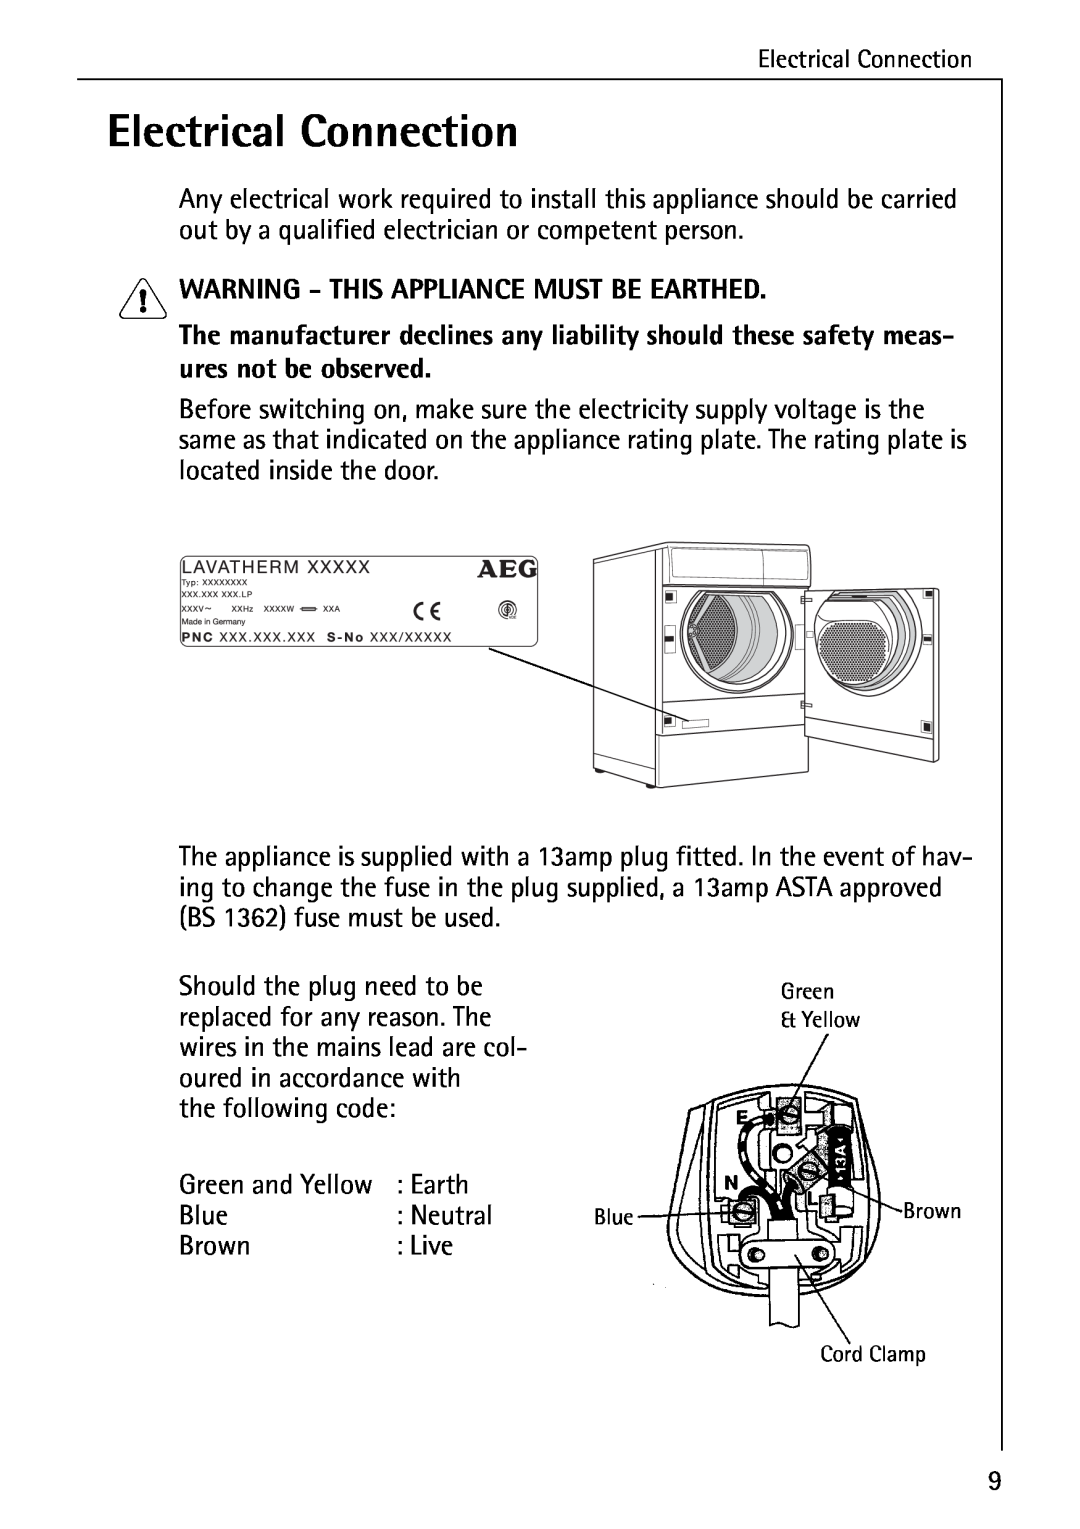 AEG 33600 installation instructions Electrical Connection, Warning - This Appliance Must Be Earthed 